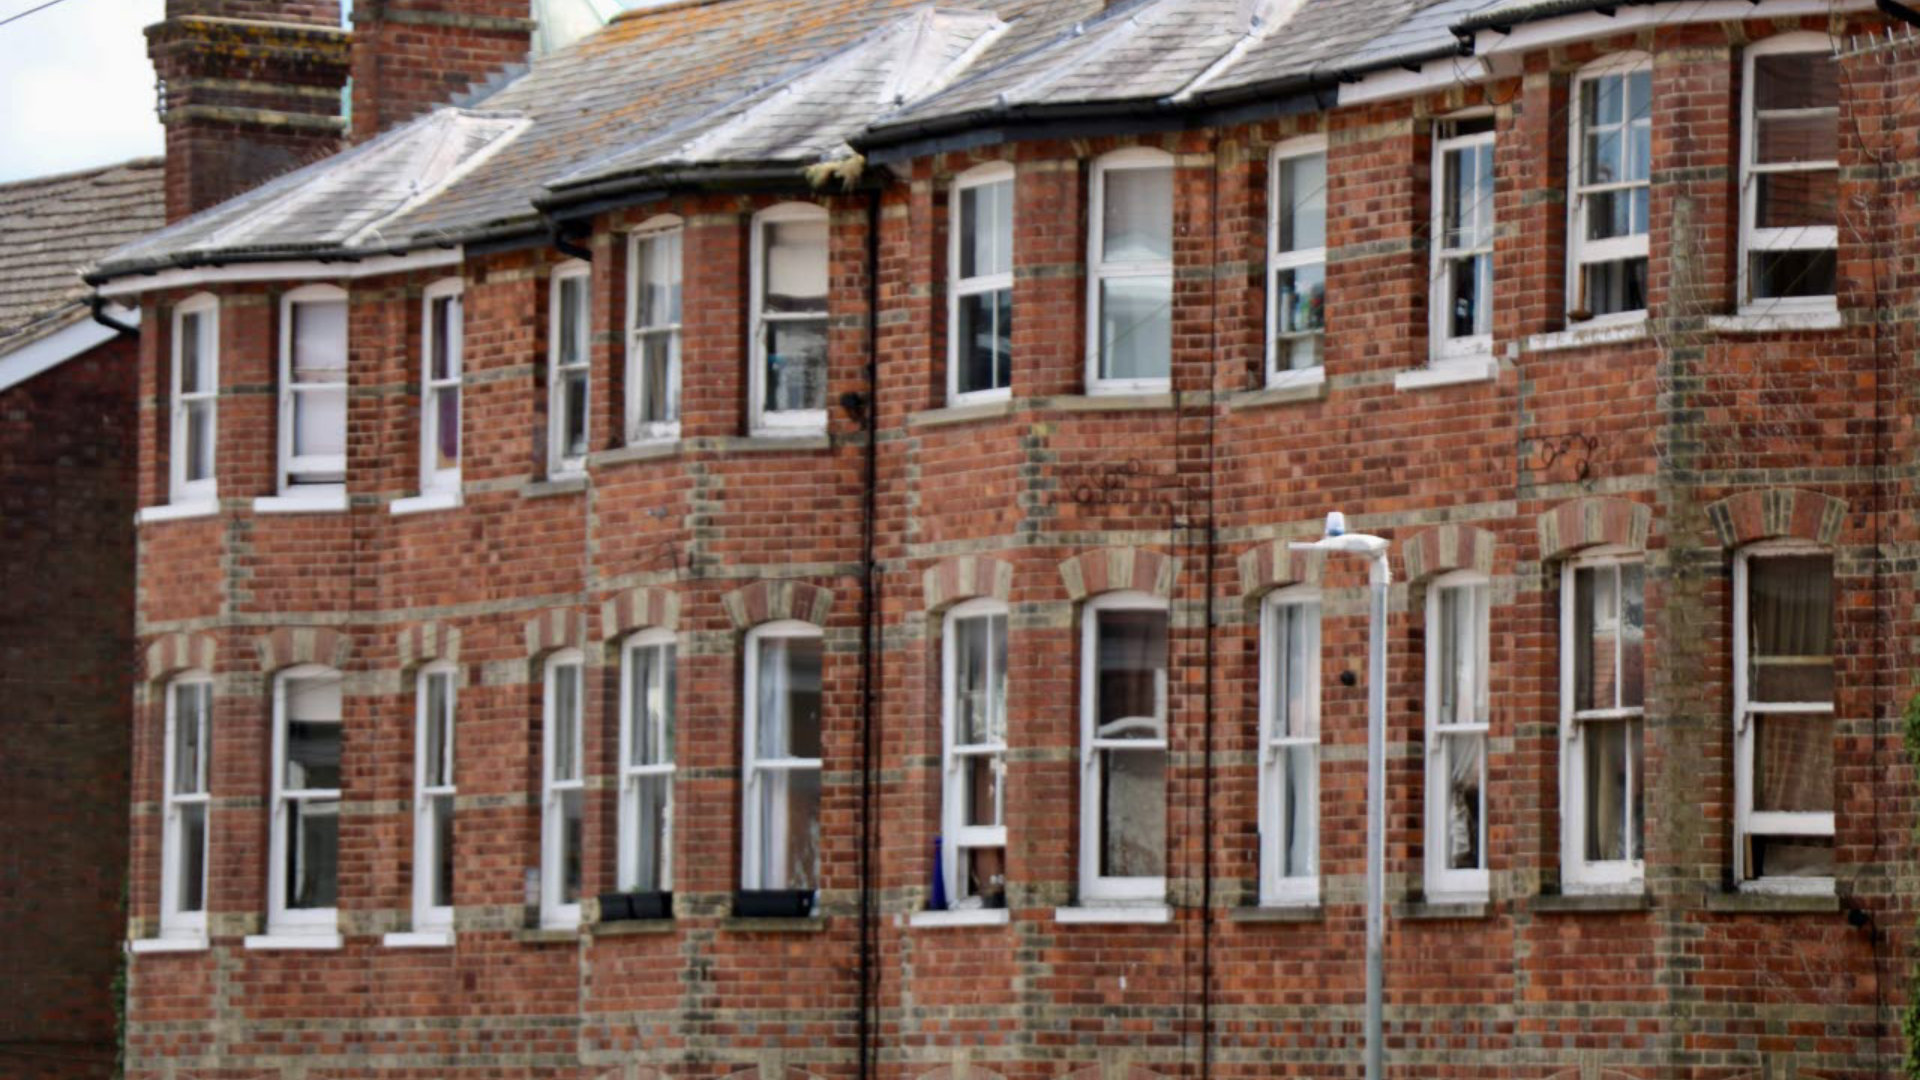 Row of red brick terraced houses